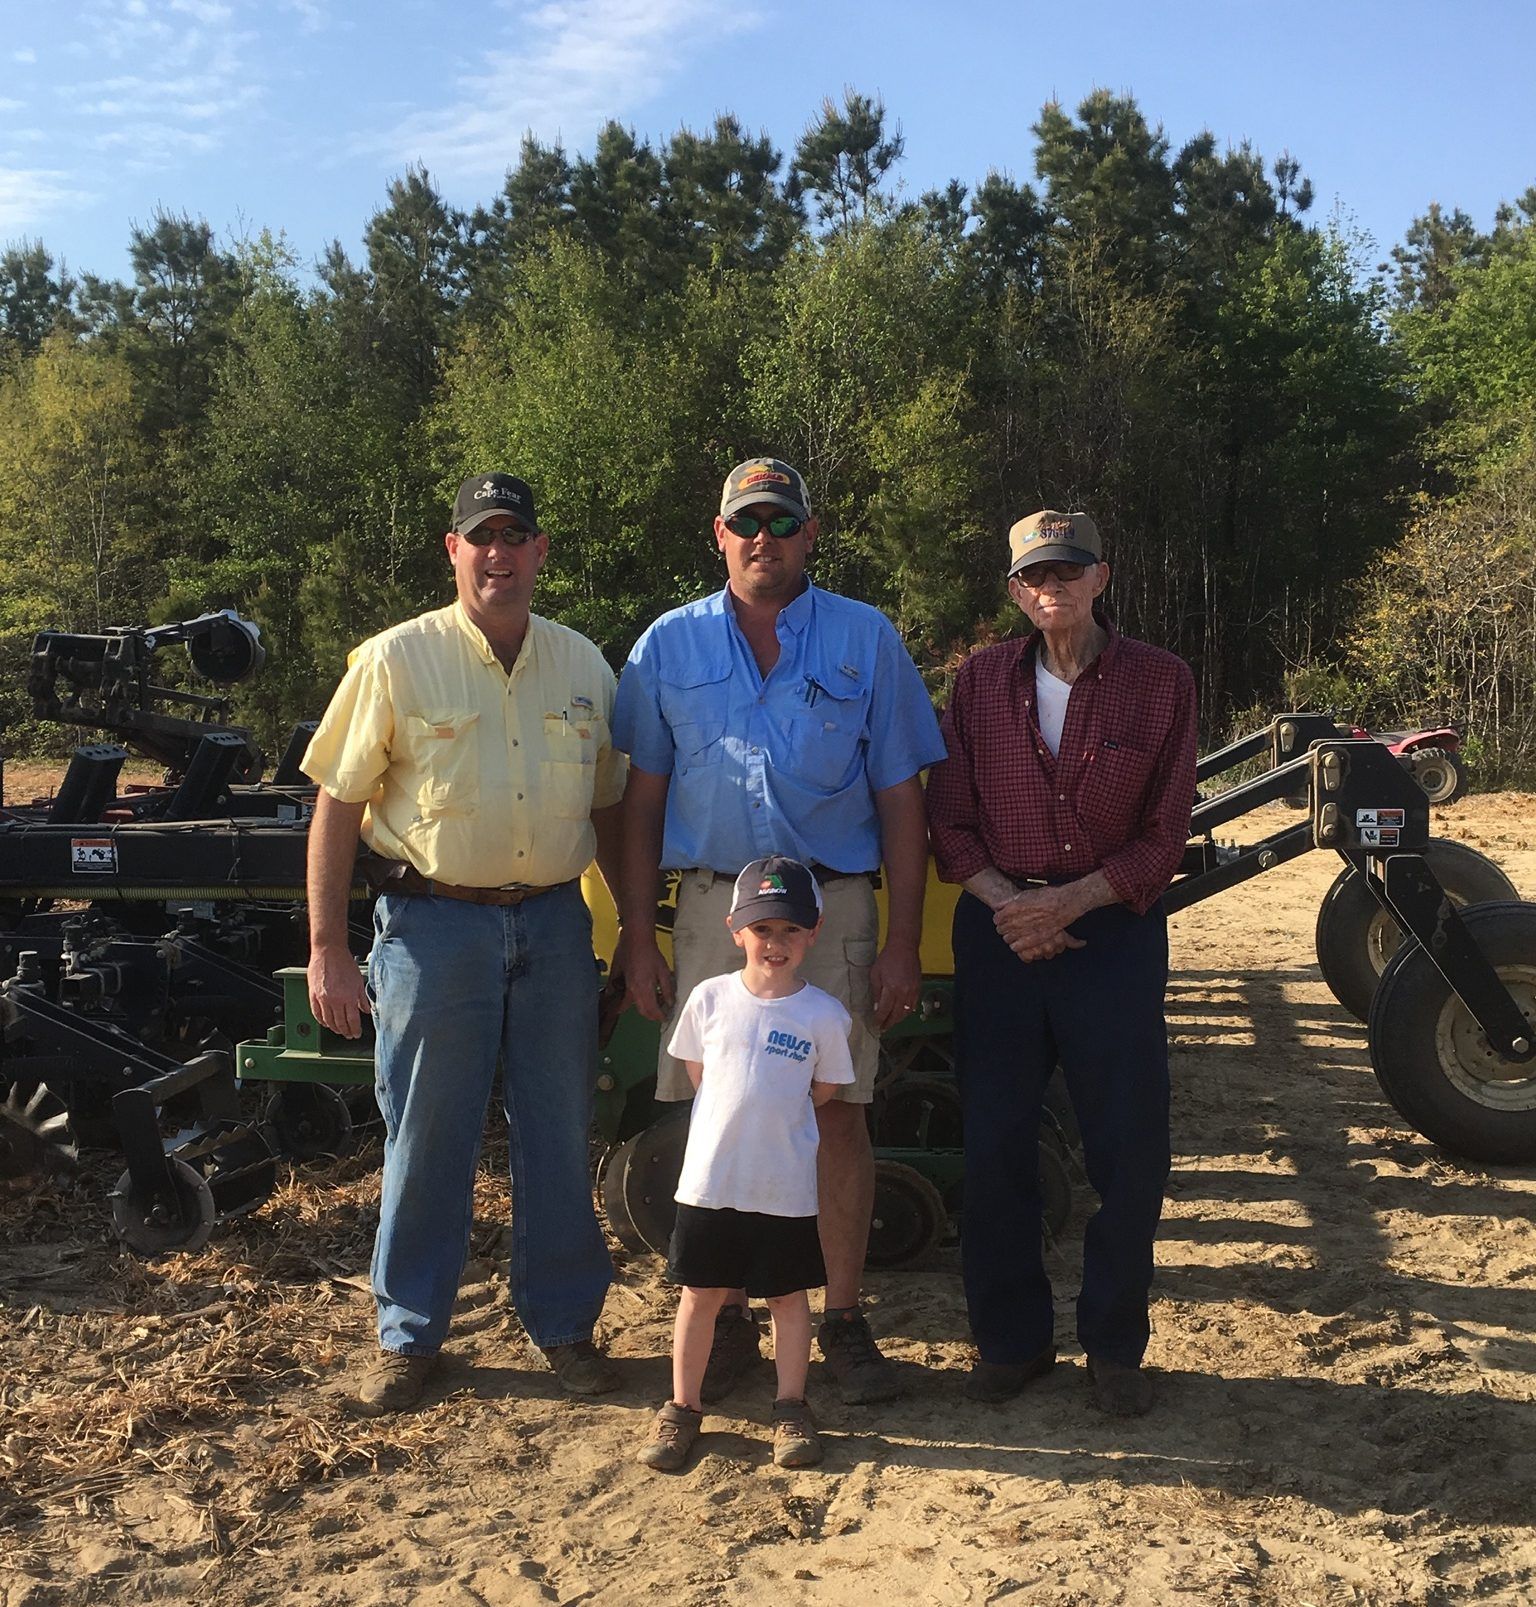 Four generations of farming men pose together